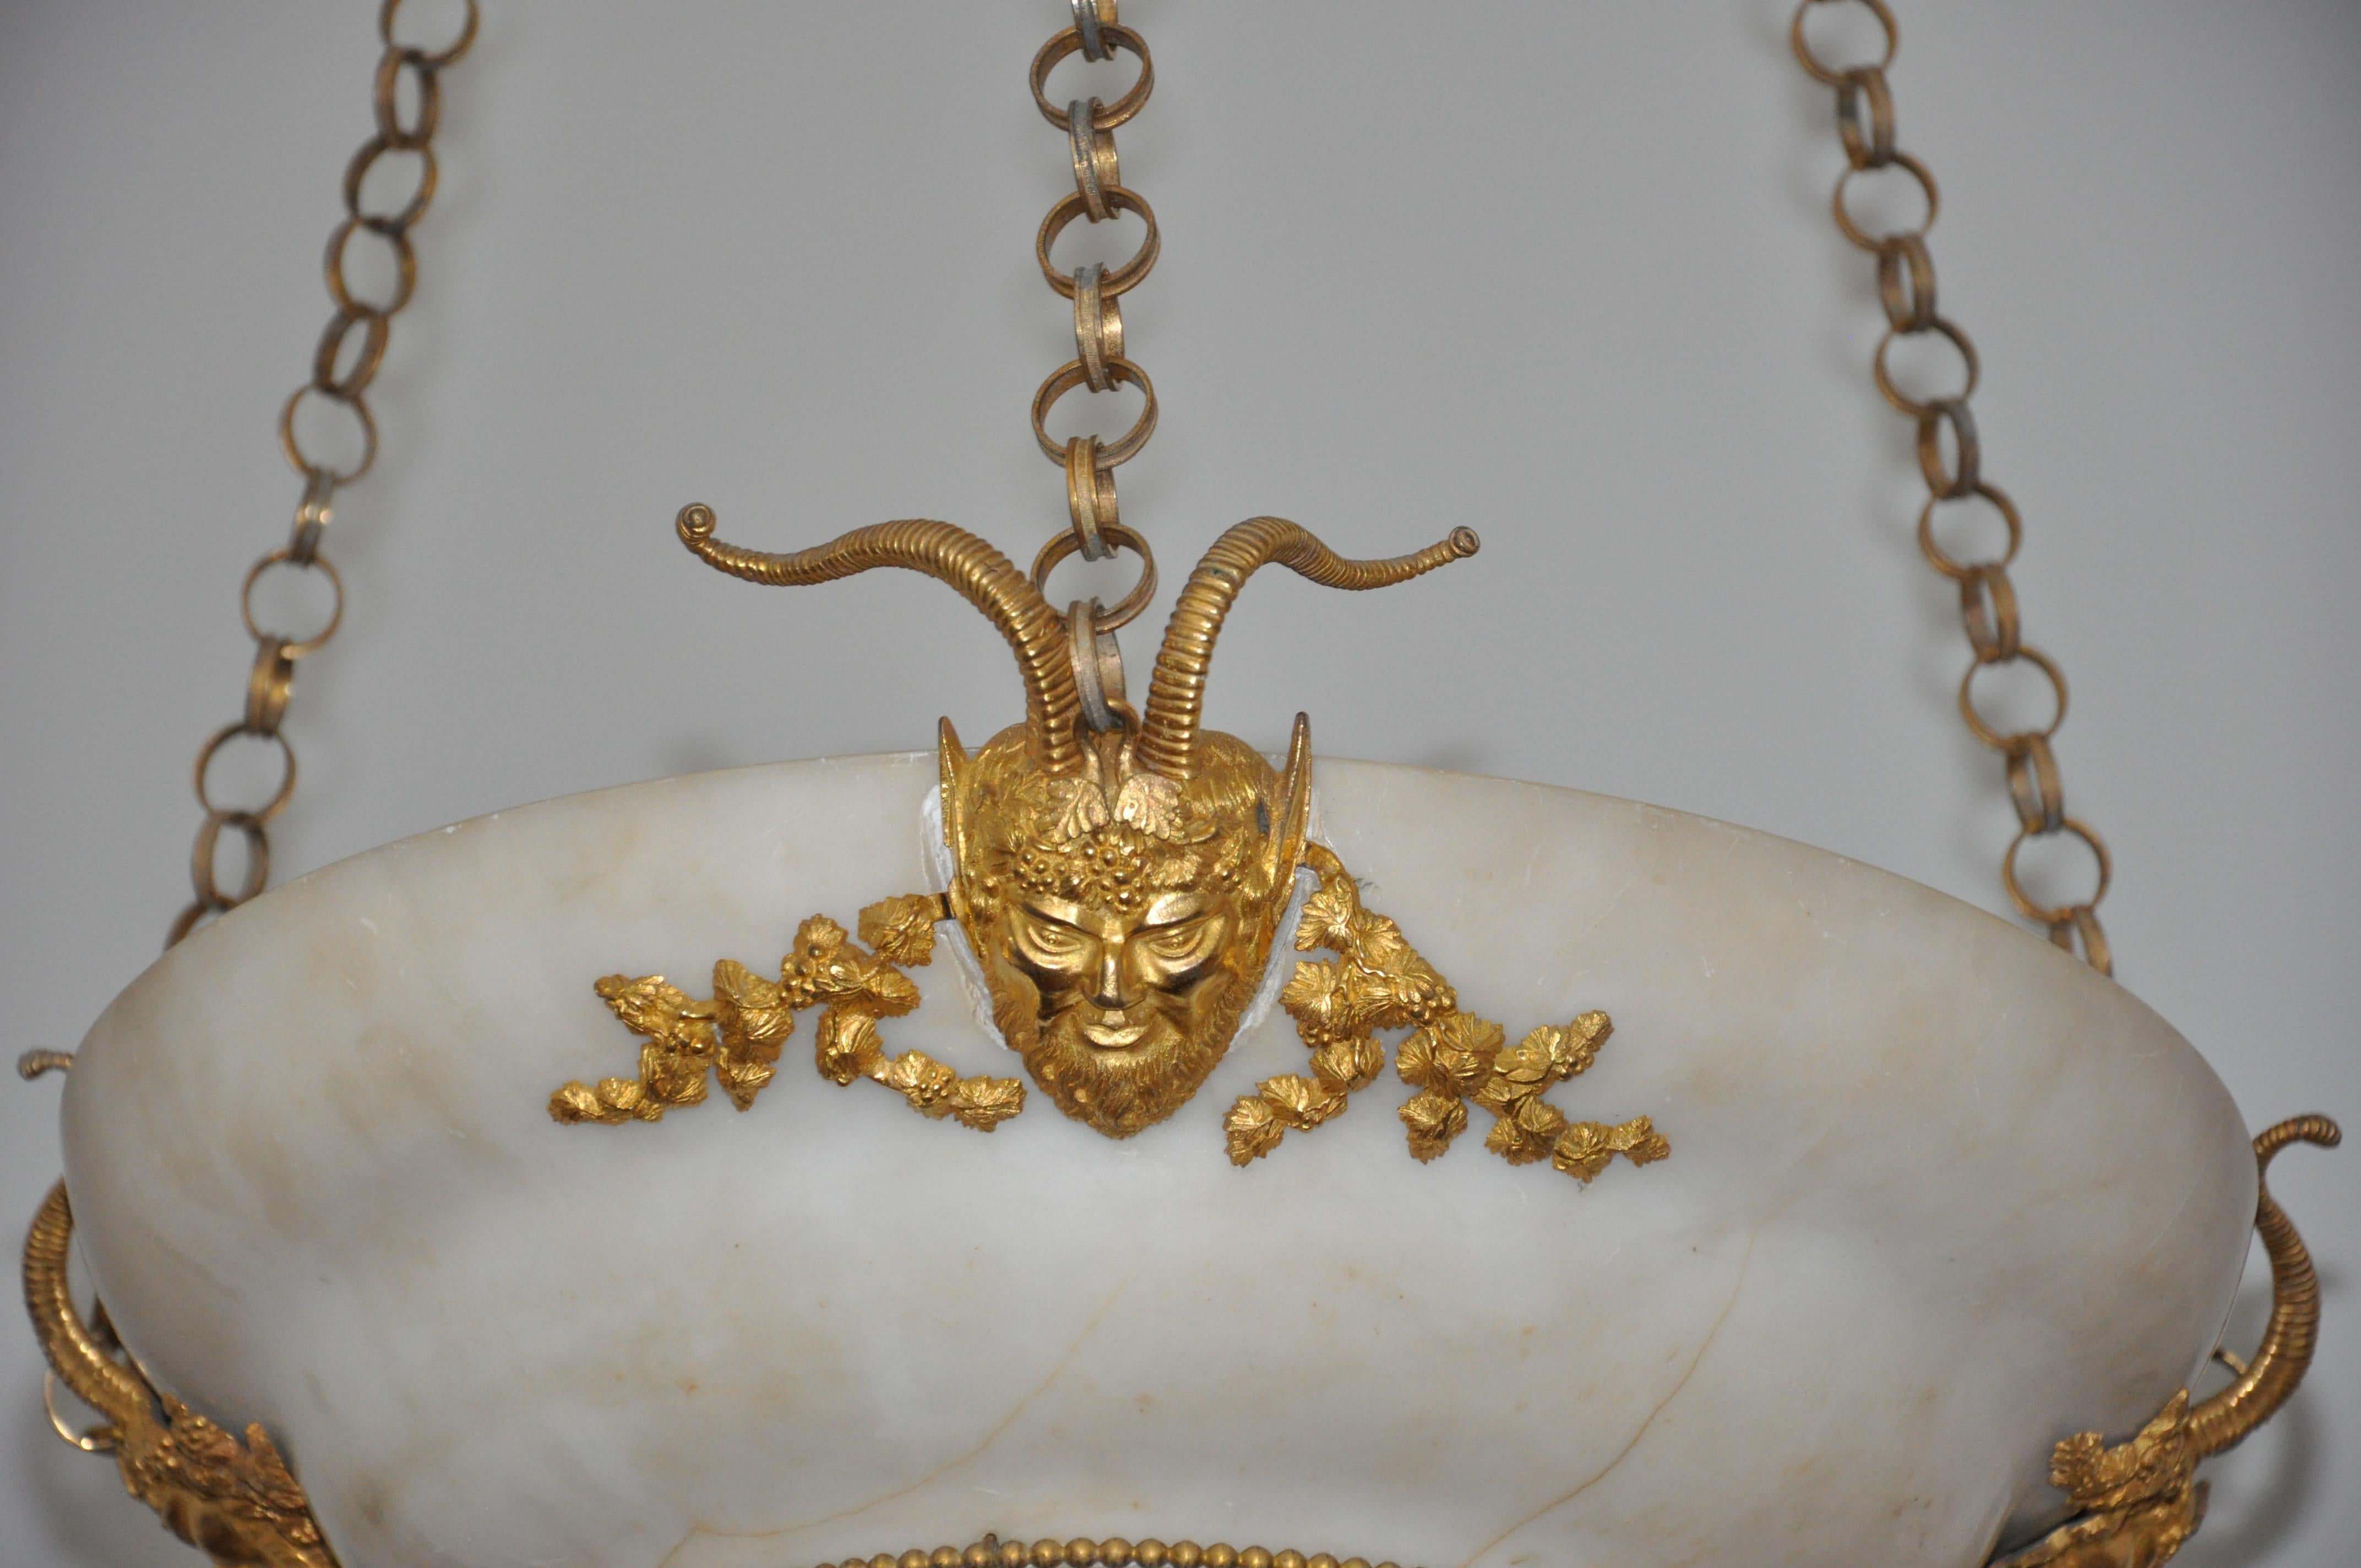 Carved Early 19th Century Swedish Neoclassical Alabaster and Ormolu Chandelier